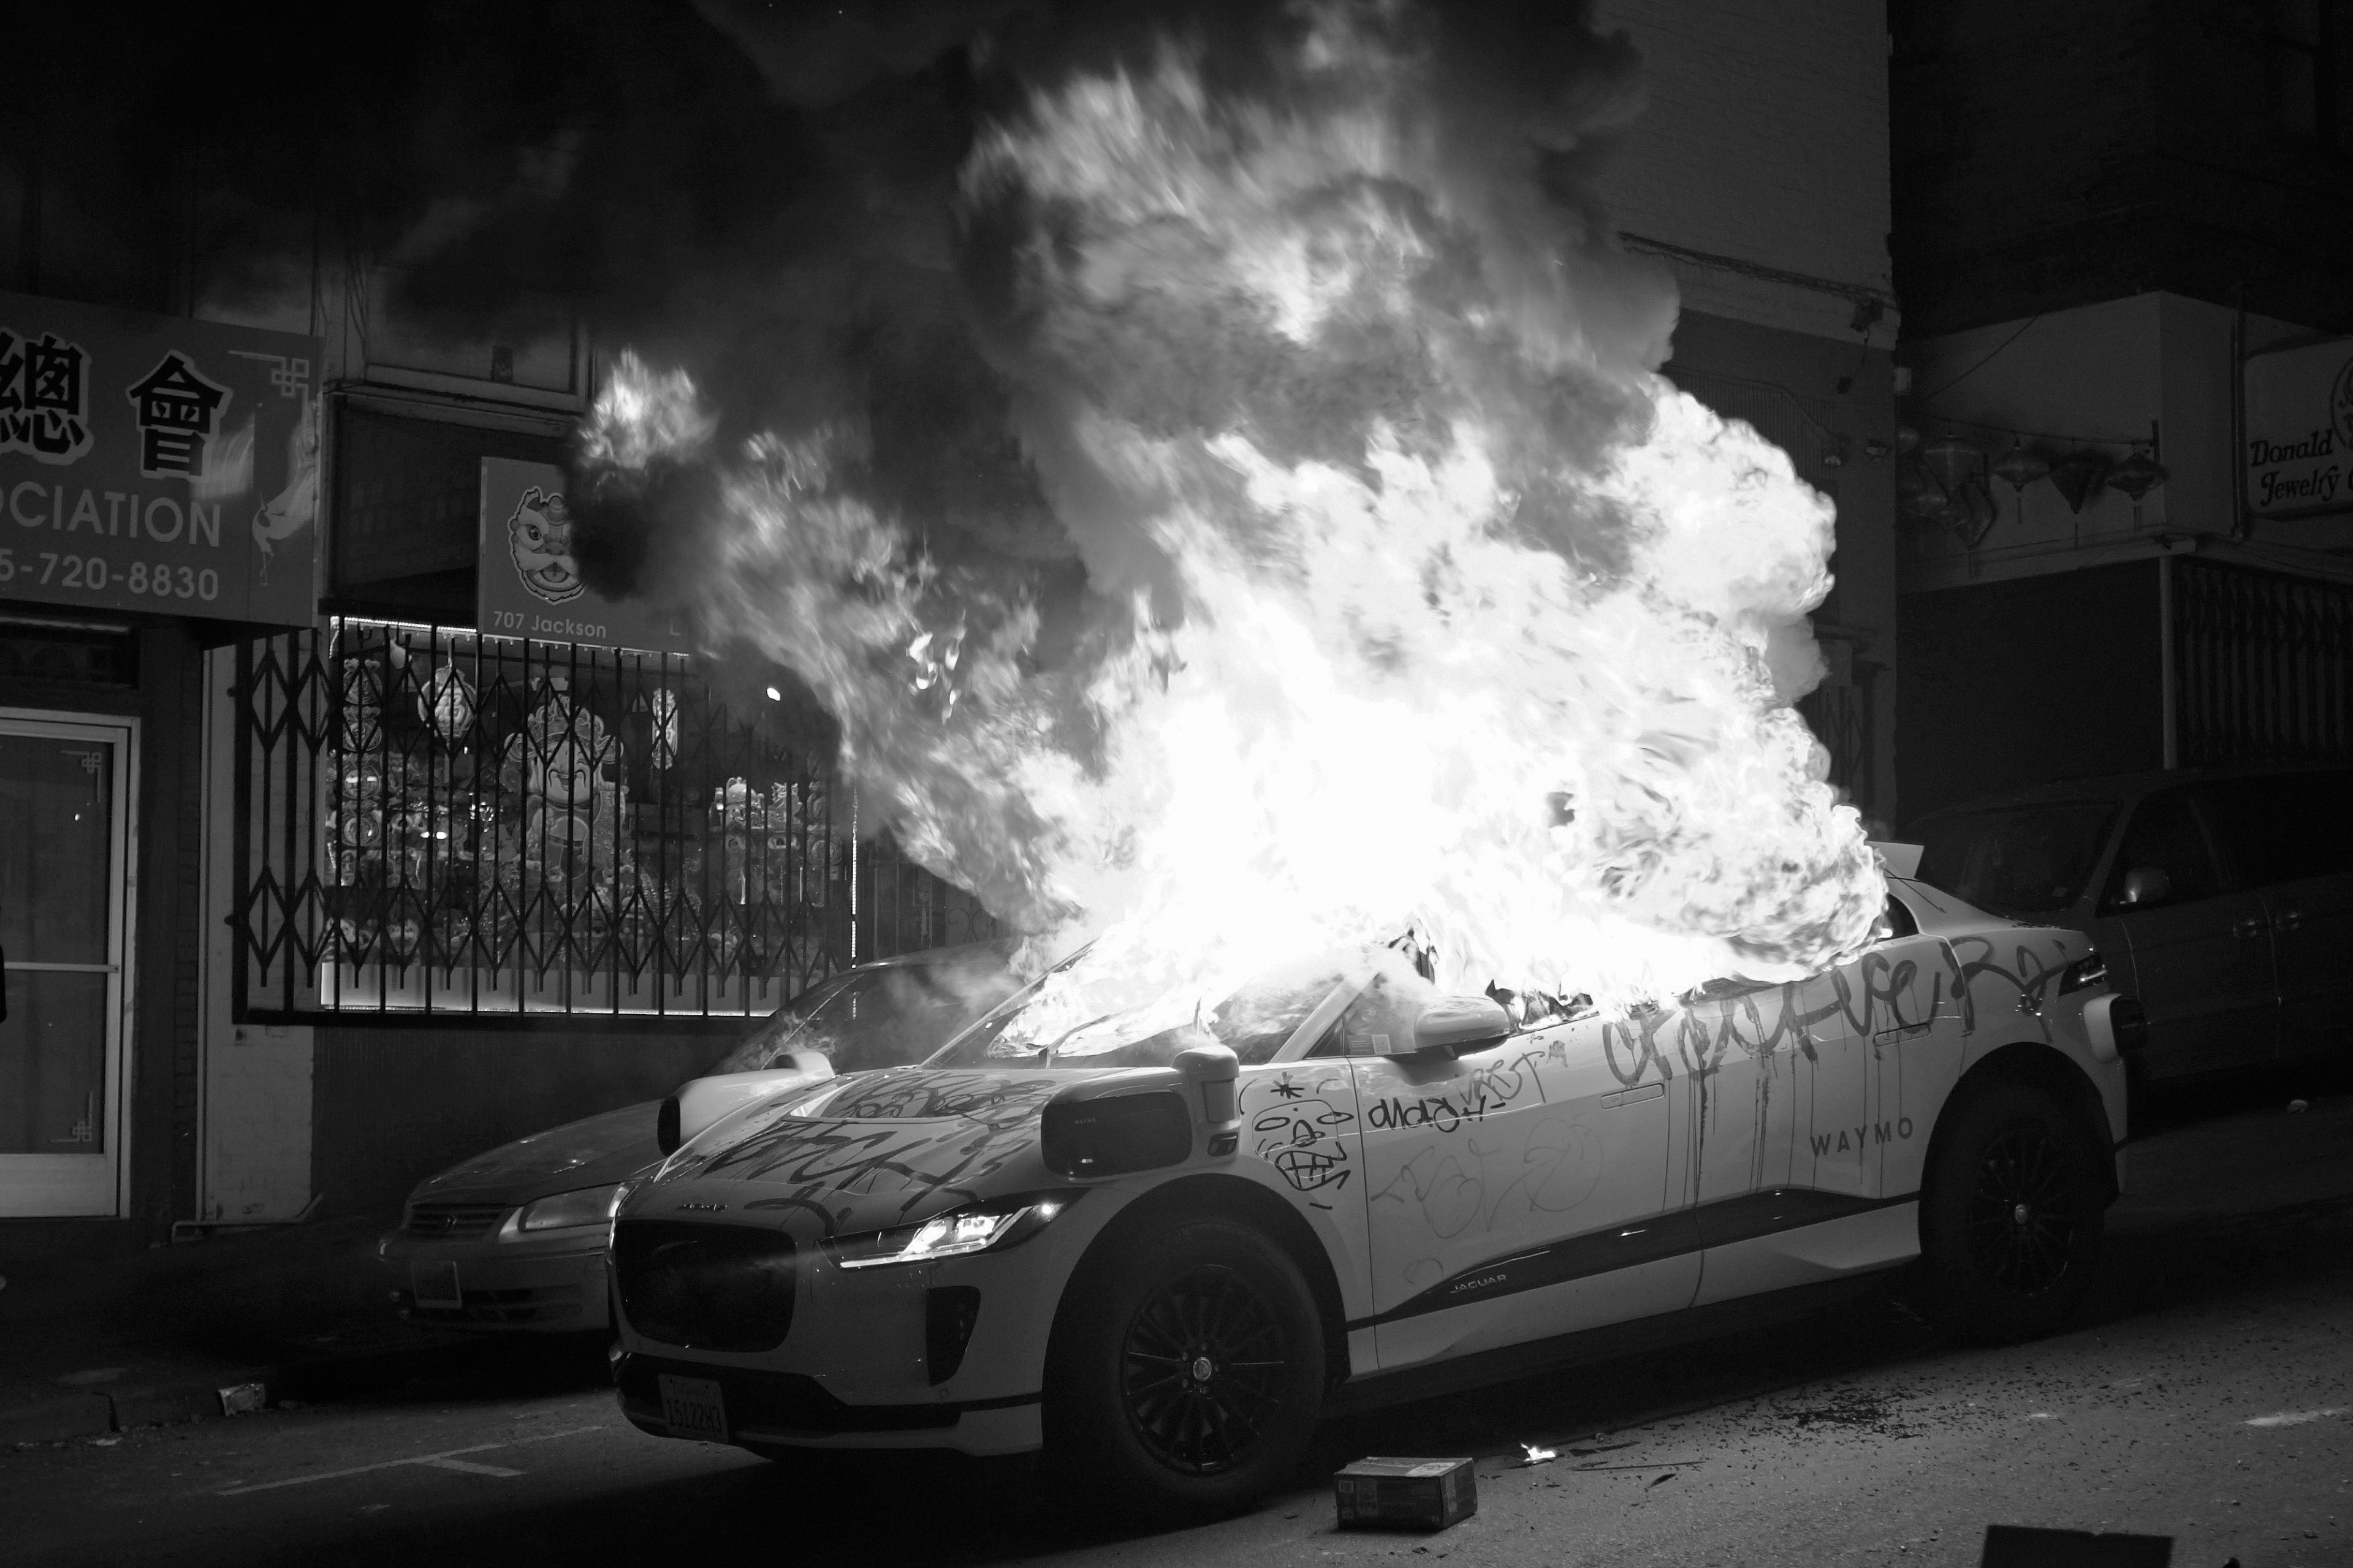 A car engulfed in flames on a city street at night, with graffiti on its side.